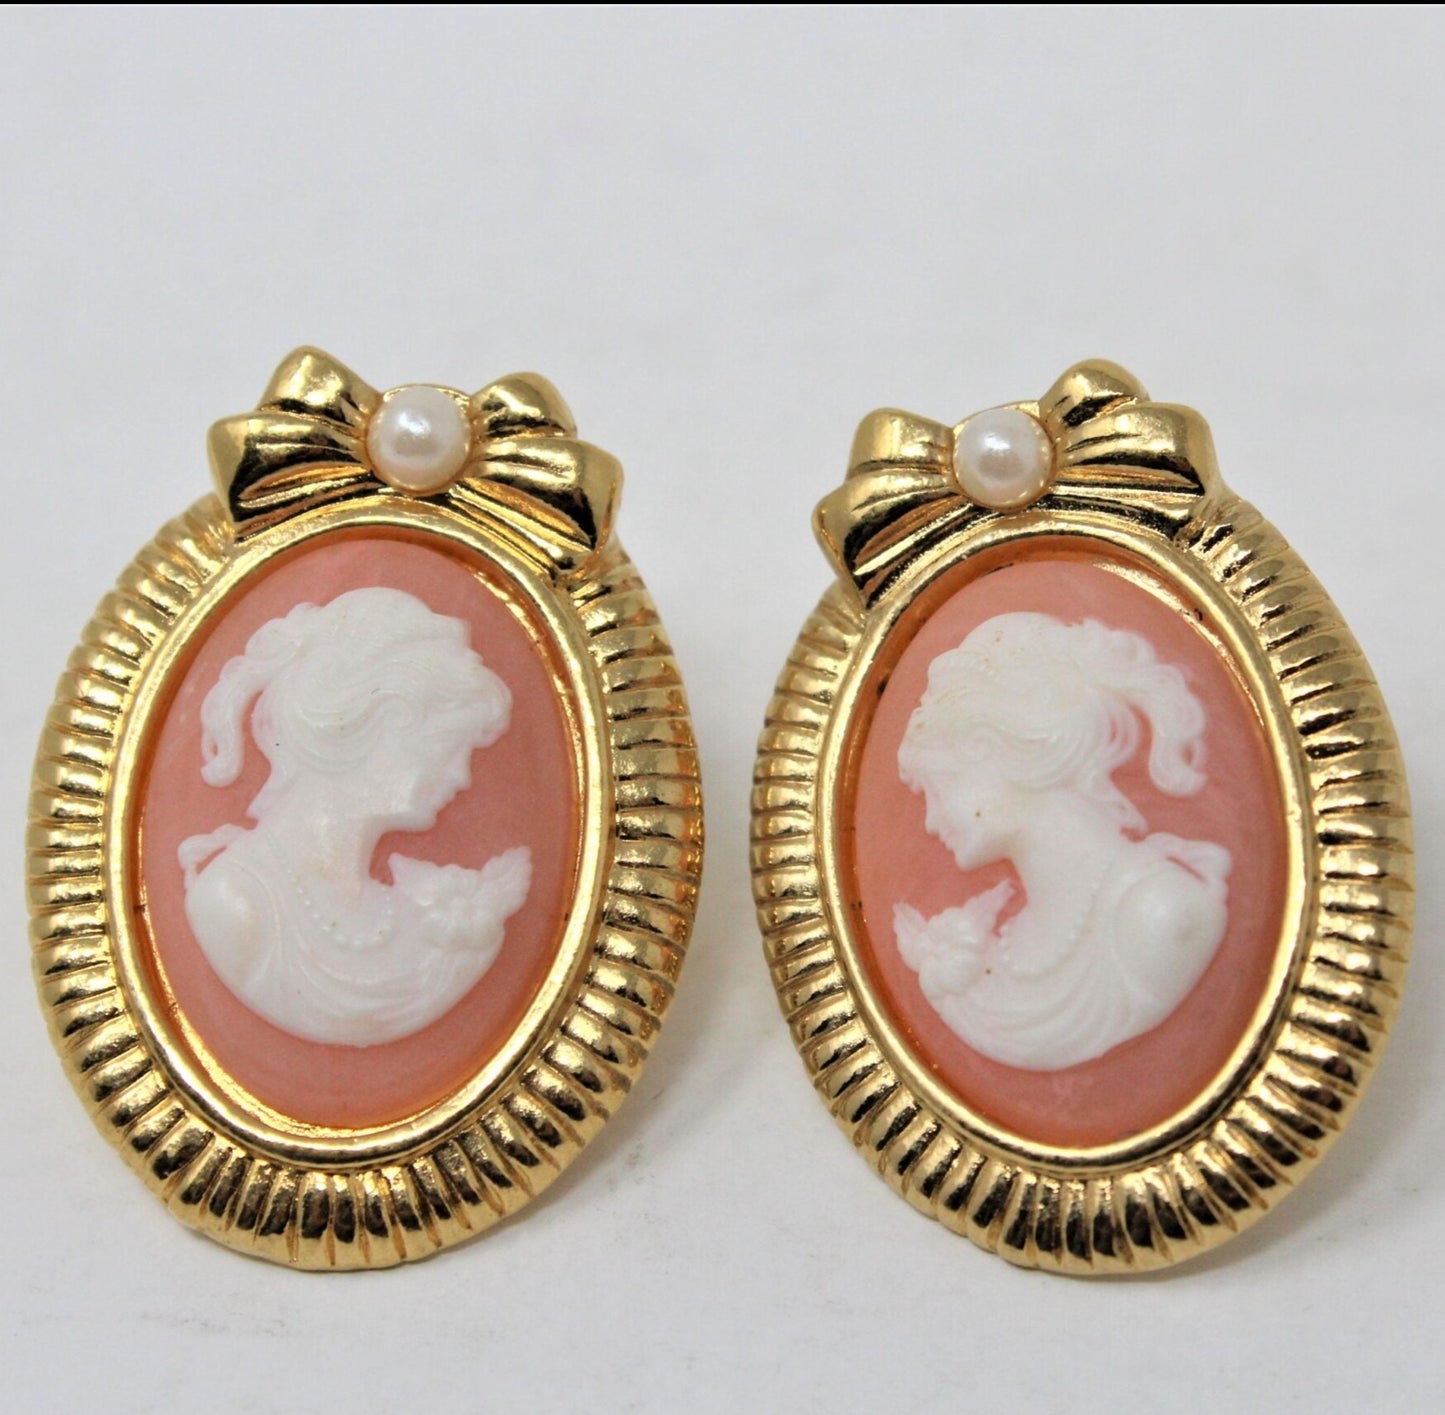 Earrings, Avon, Pink Cameo with Bow & Pearl Accents, Gold Tone Posts, Vintage